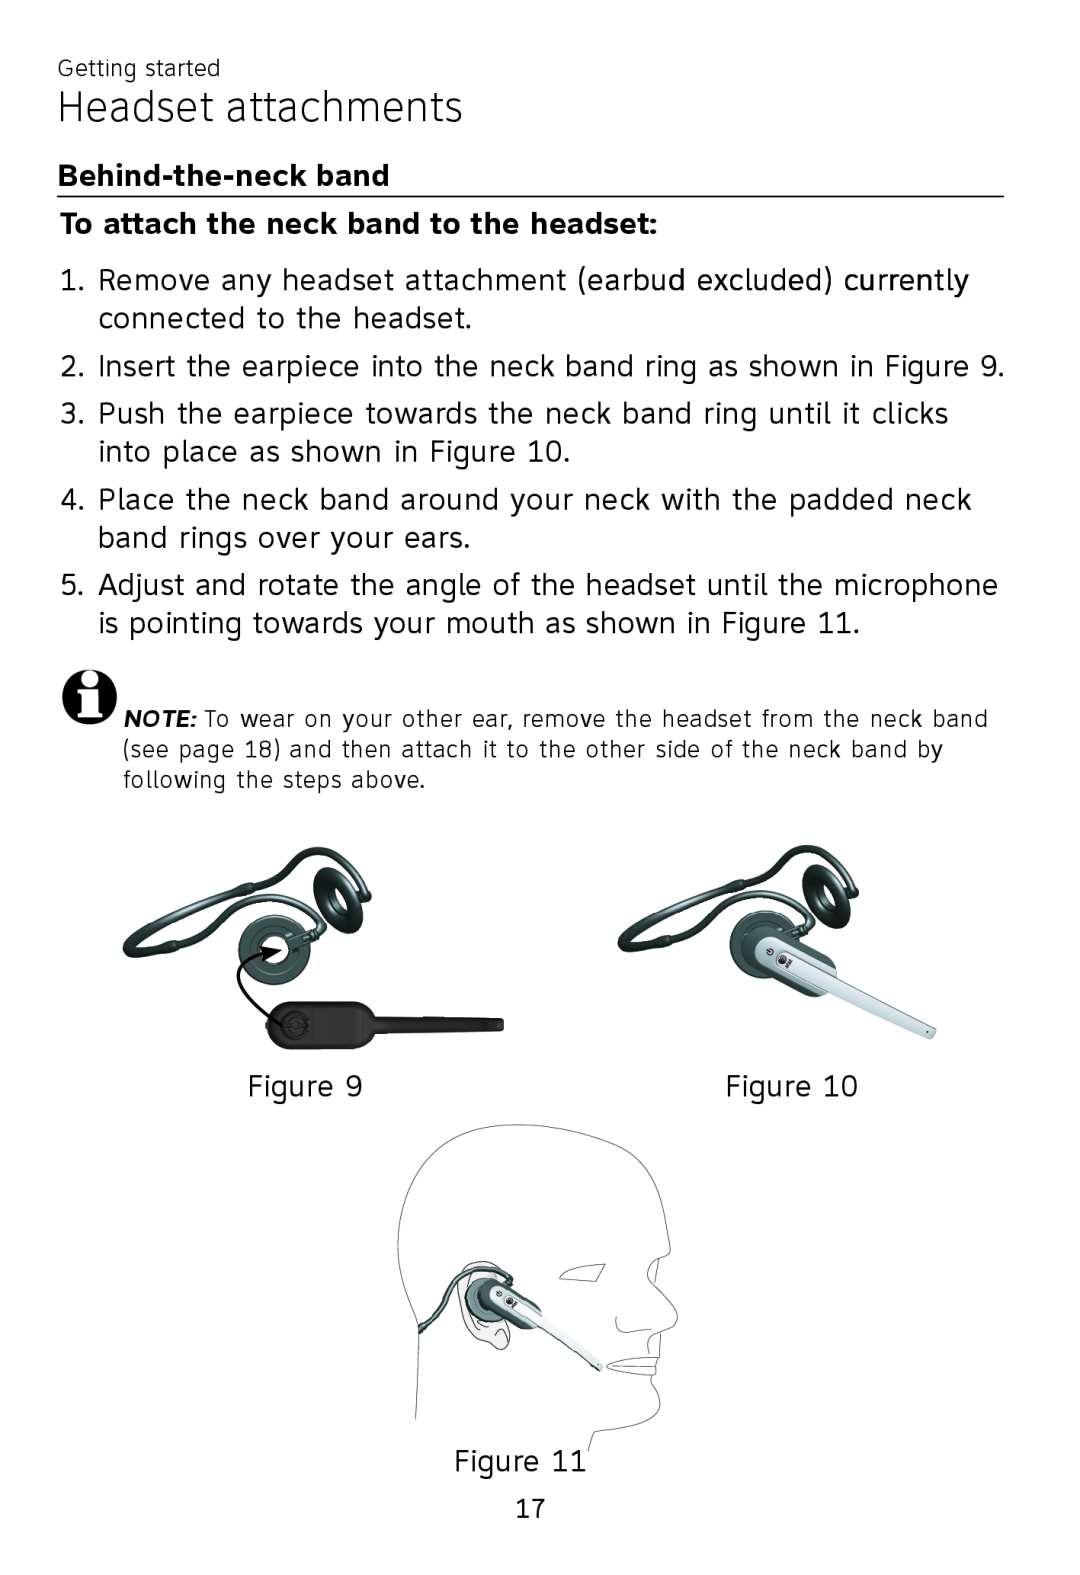 AT&T TL7700 user manual Behind-the-neckband, To attach the neck band to the headset, Headset attachments 